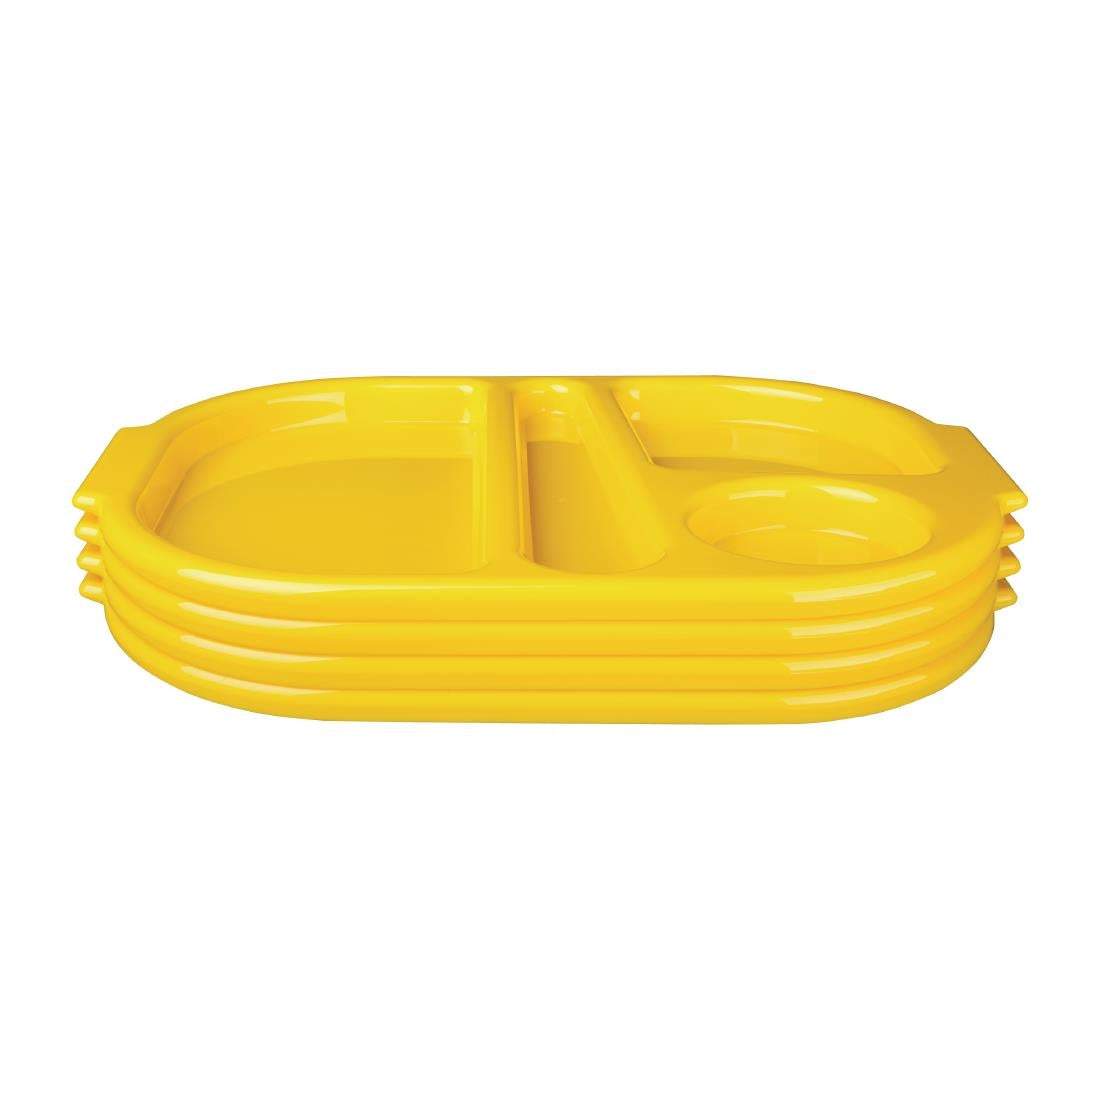 DL127 Kristallon Small Polycarbonate Compartment Food Trays Yellow 322mm JD Catering Equipment Solutions Ltd